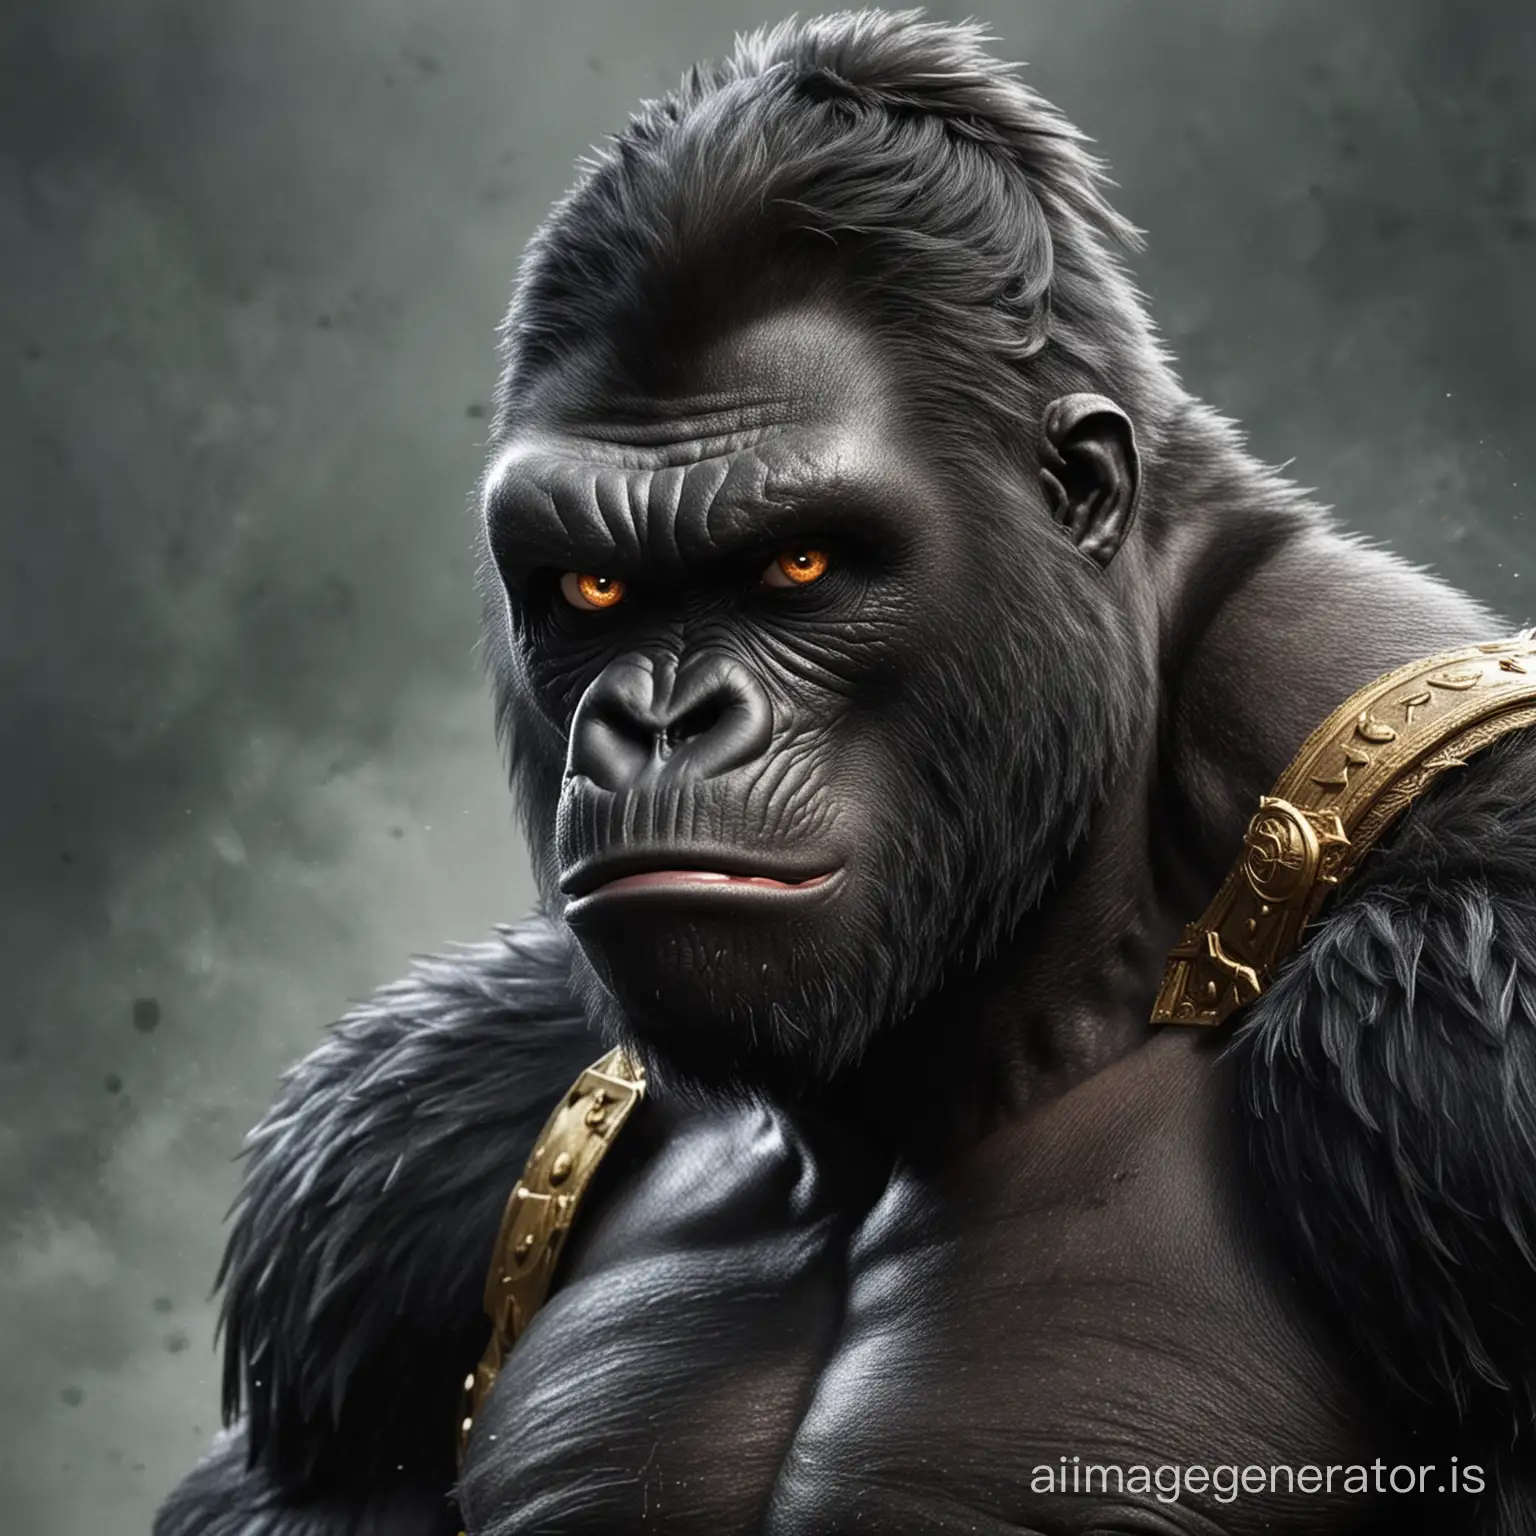 Hybrid-Gorilla-King-Fighter-with-Eye-Patch-Engaging-in-Combat